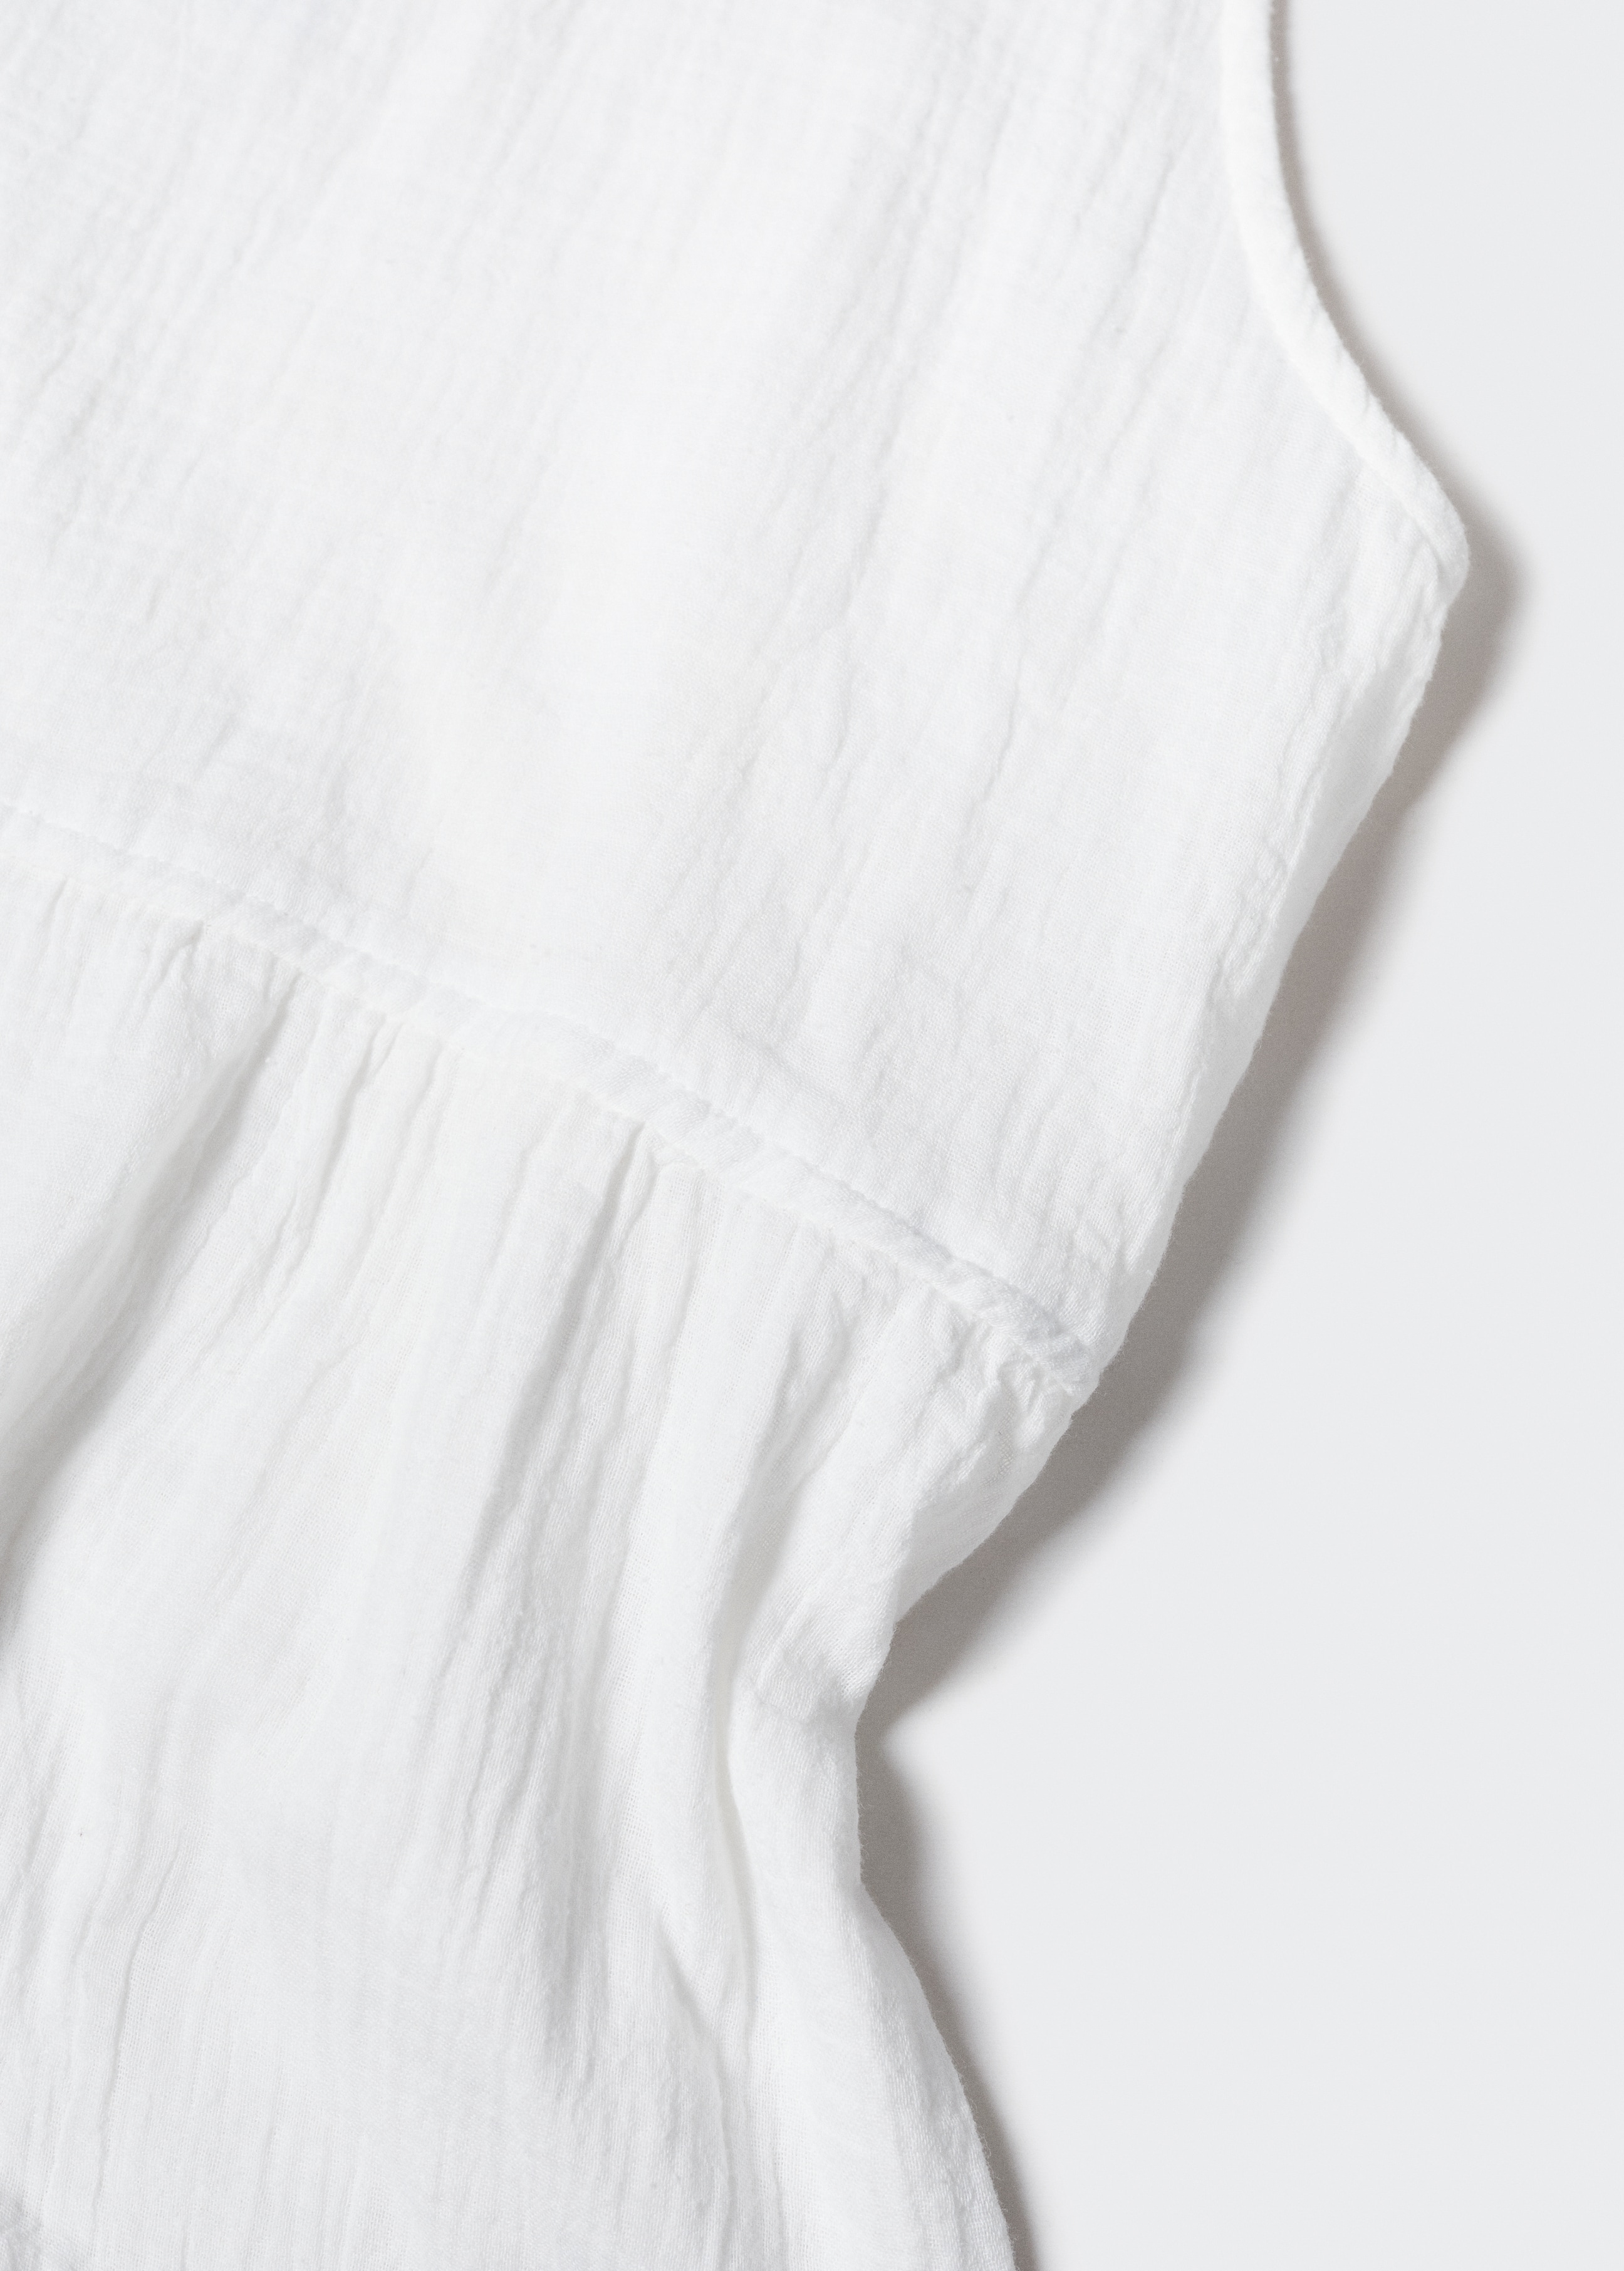 Flared cotton dress - Details of the article 8